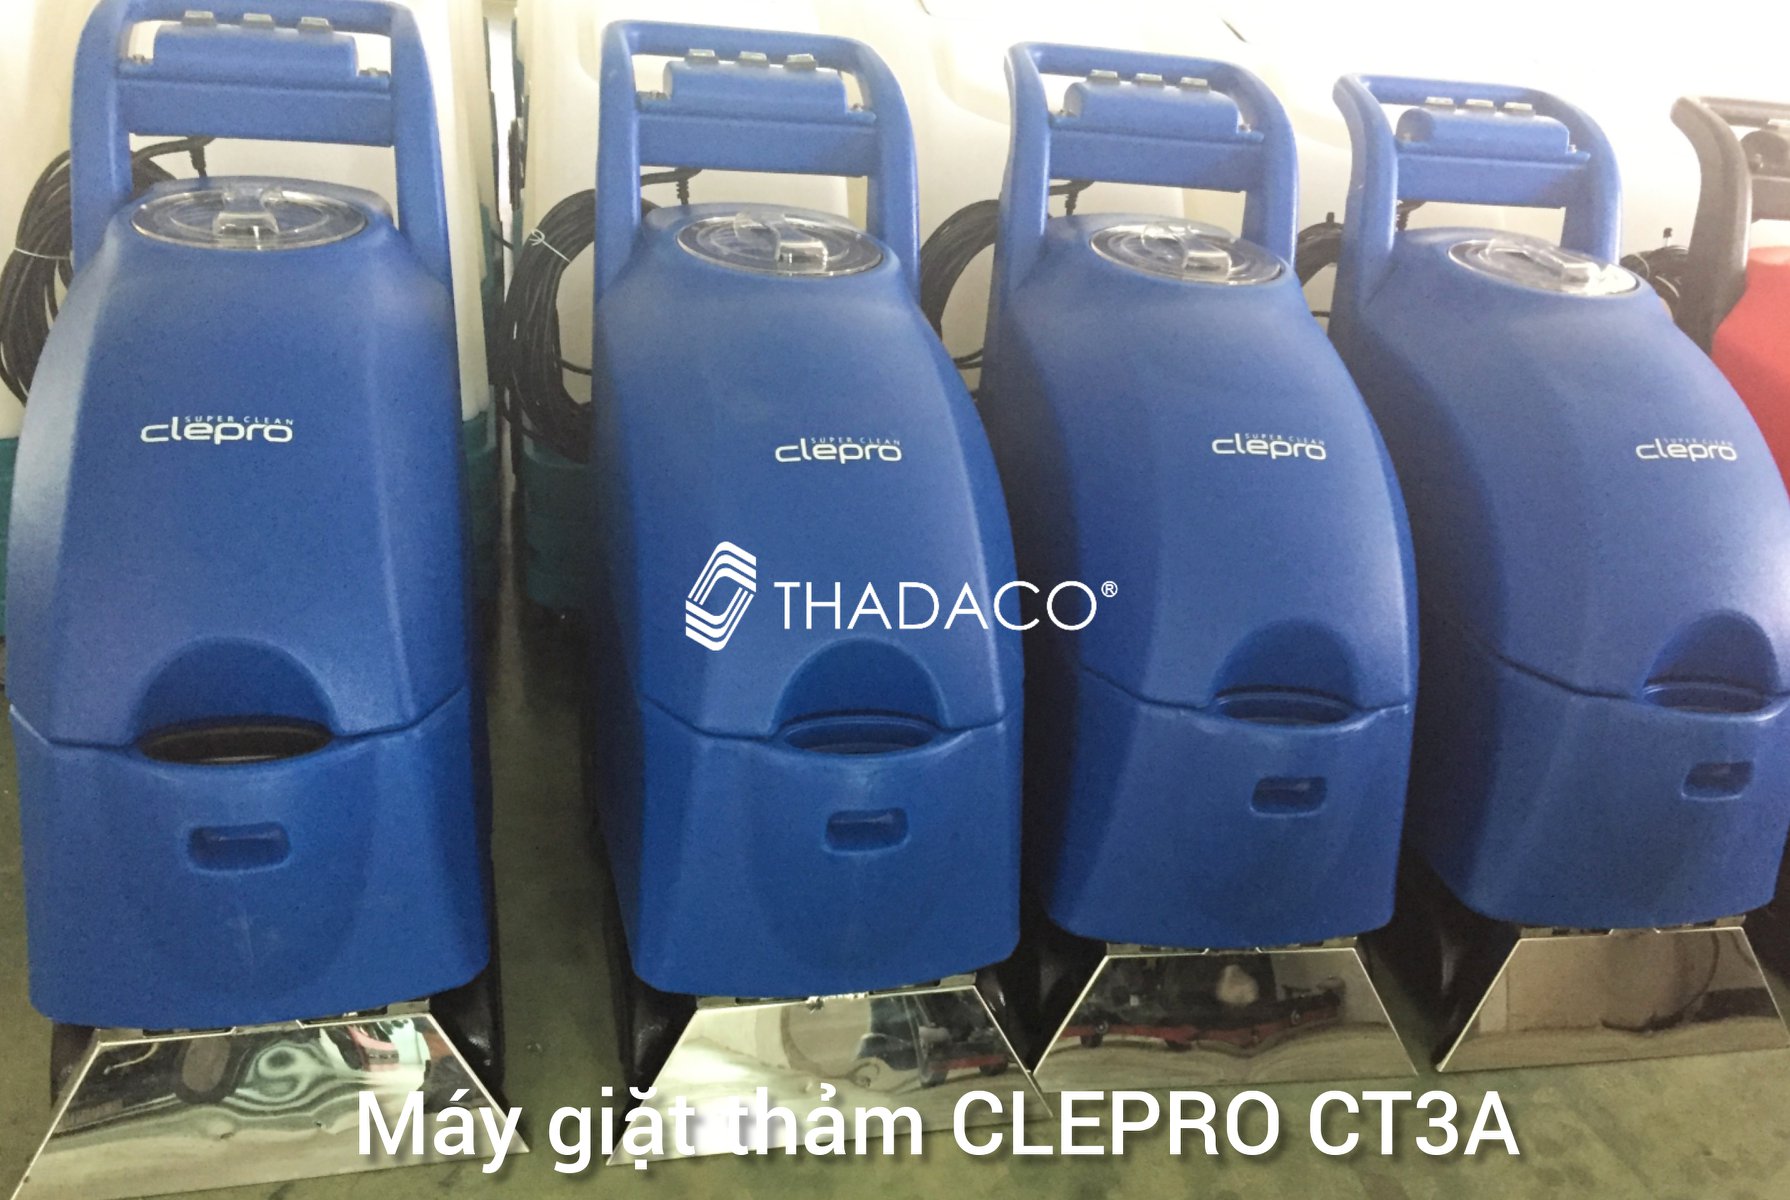 May giat tham clepro ct3a